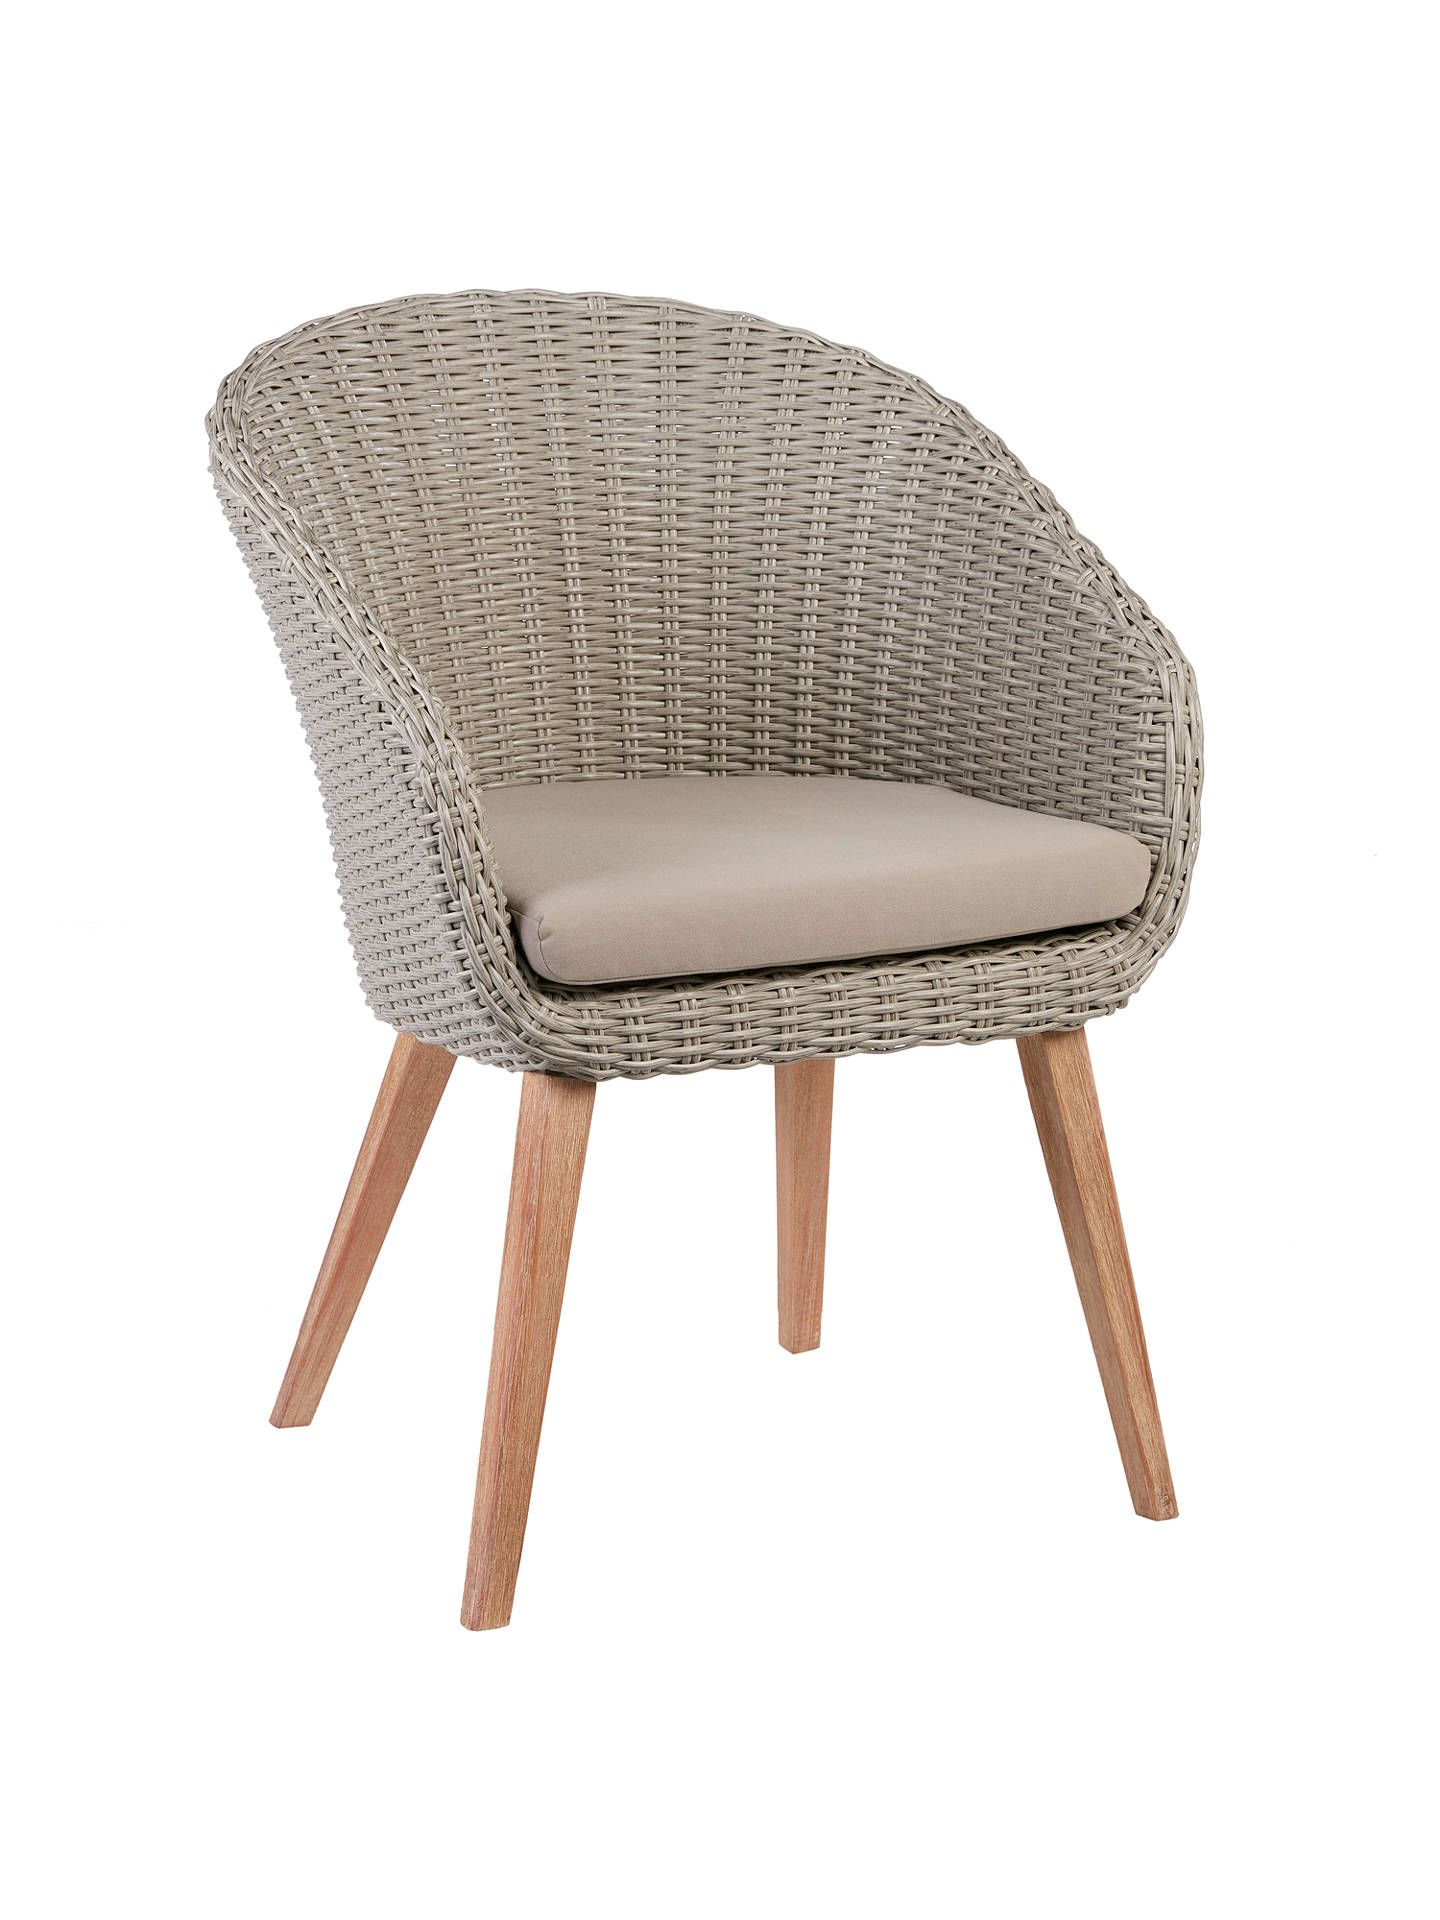 V Brand New To John Lewis Sol Four Seater Round Garden Table & Chairs ISP £999 (John Lewis) Stock - Image 5 of 6